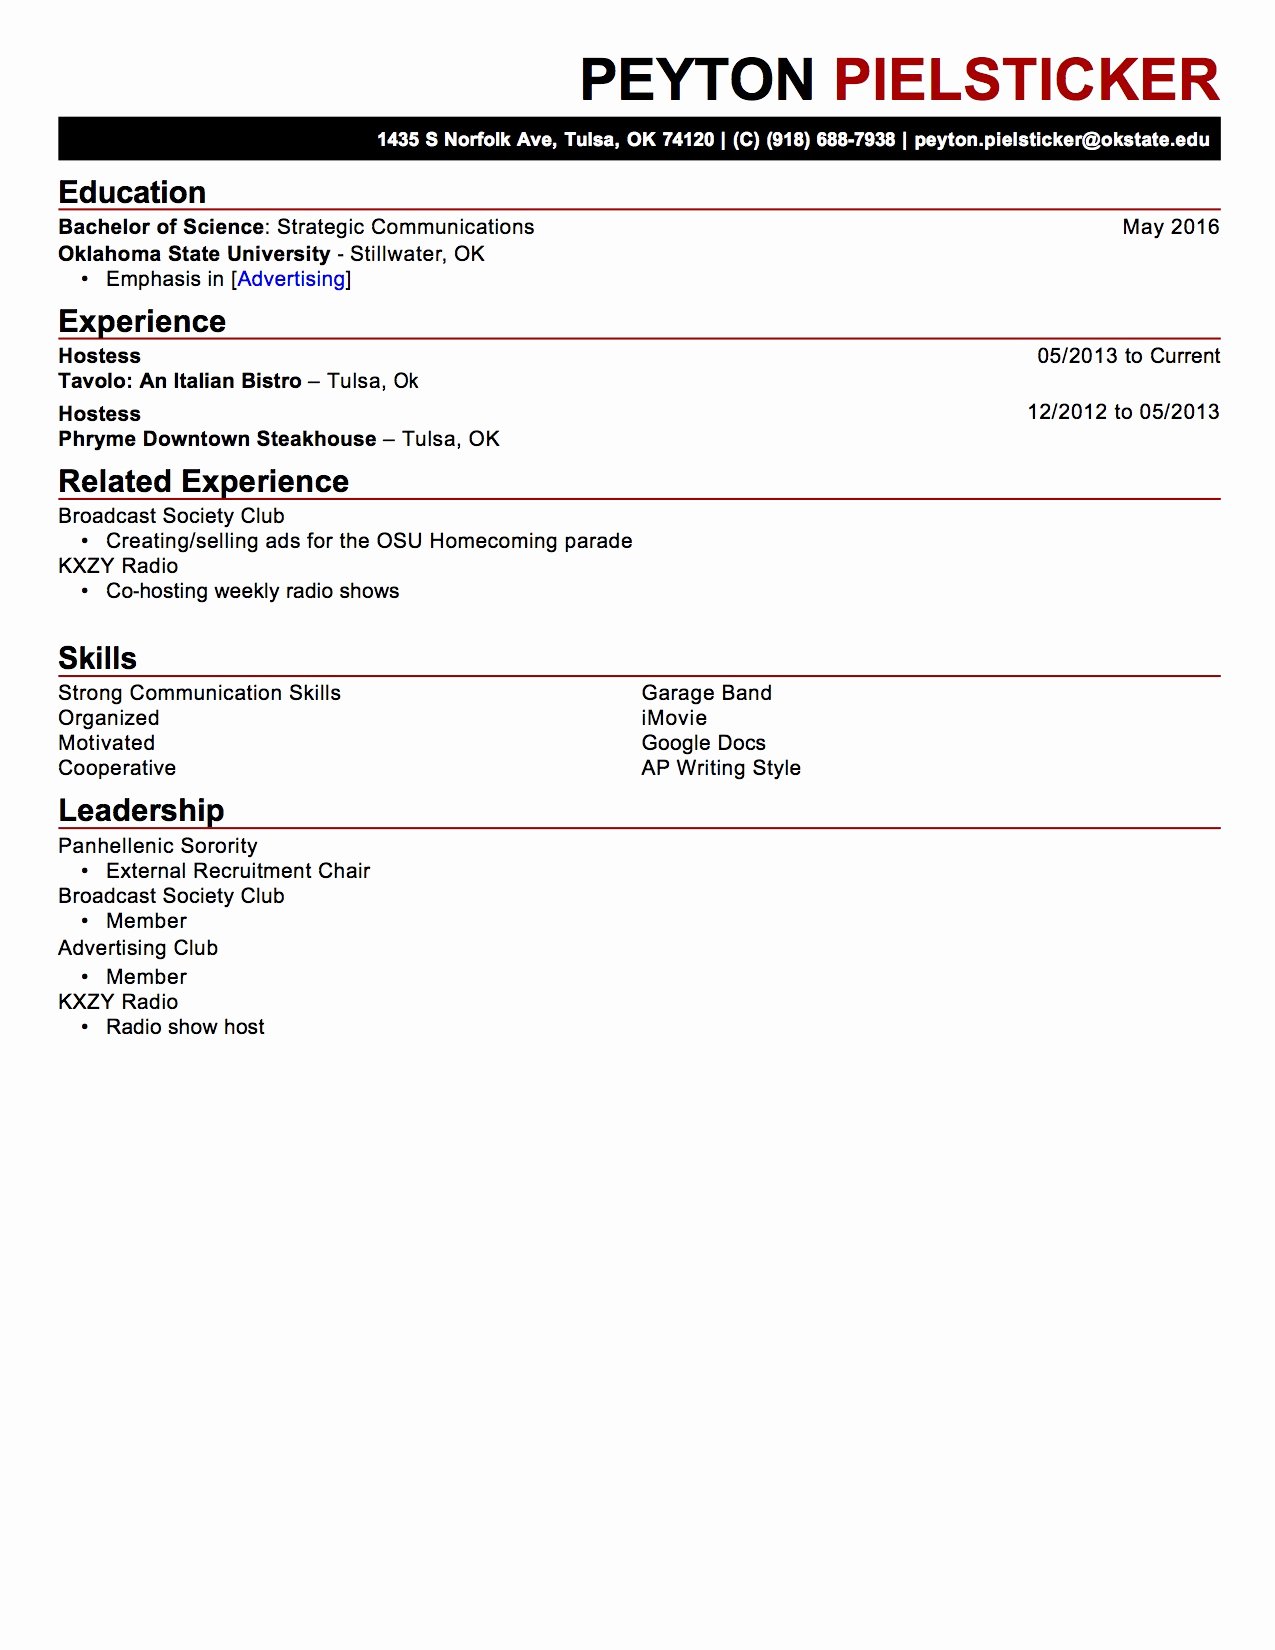 Expected Graduation Date On Resume Lovely Resume Expected Graduation Date Line Writing Lab